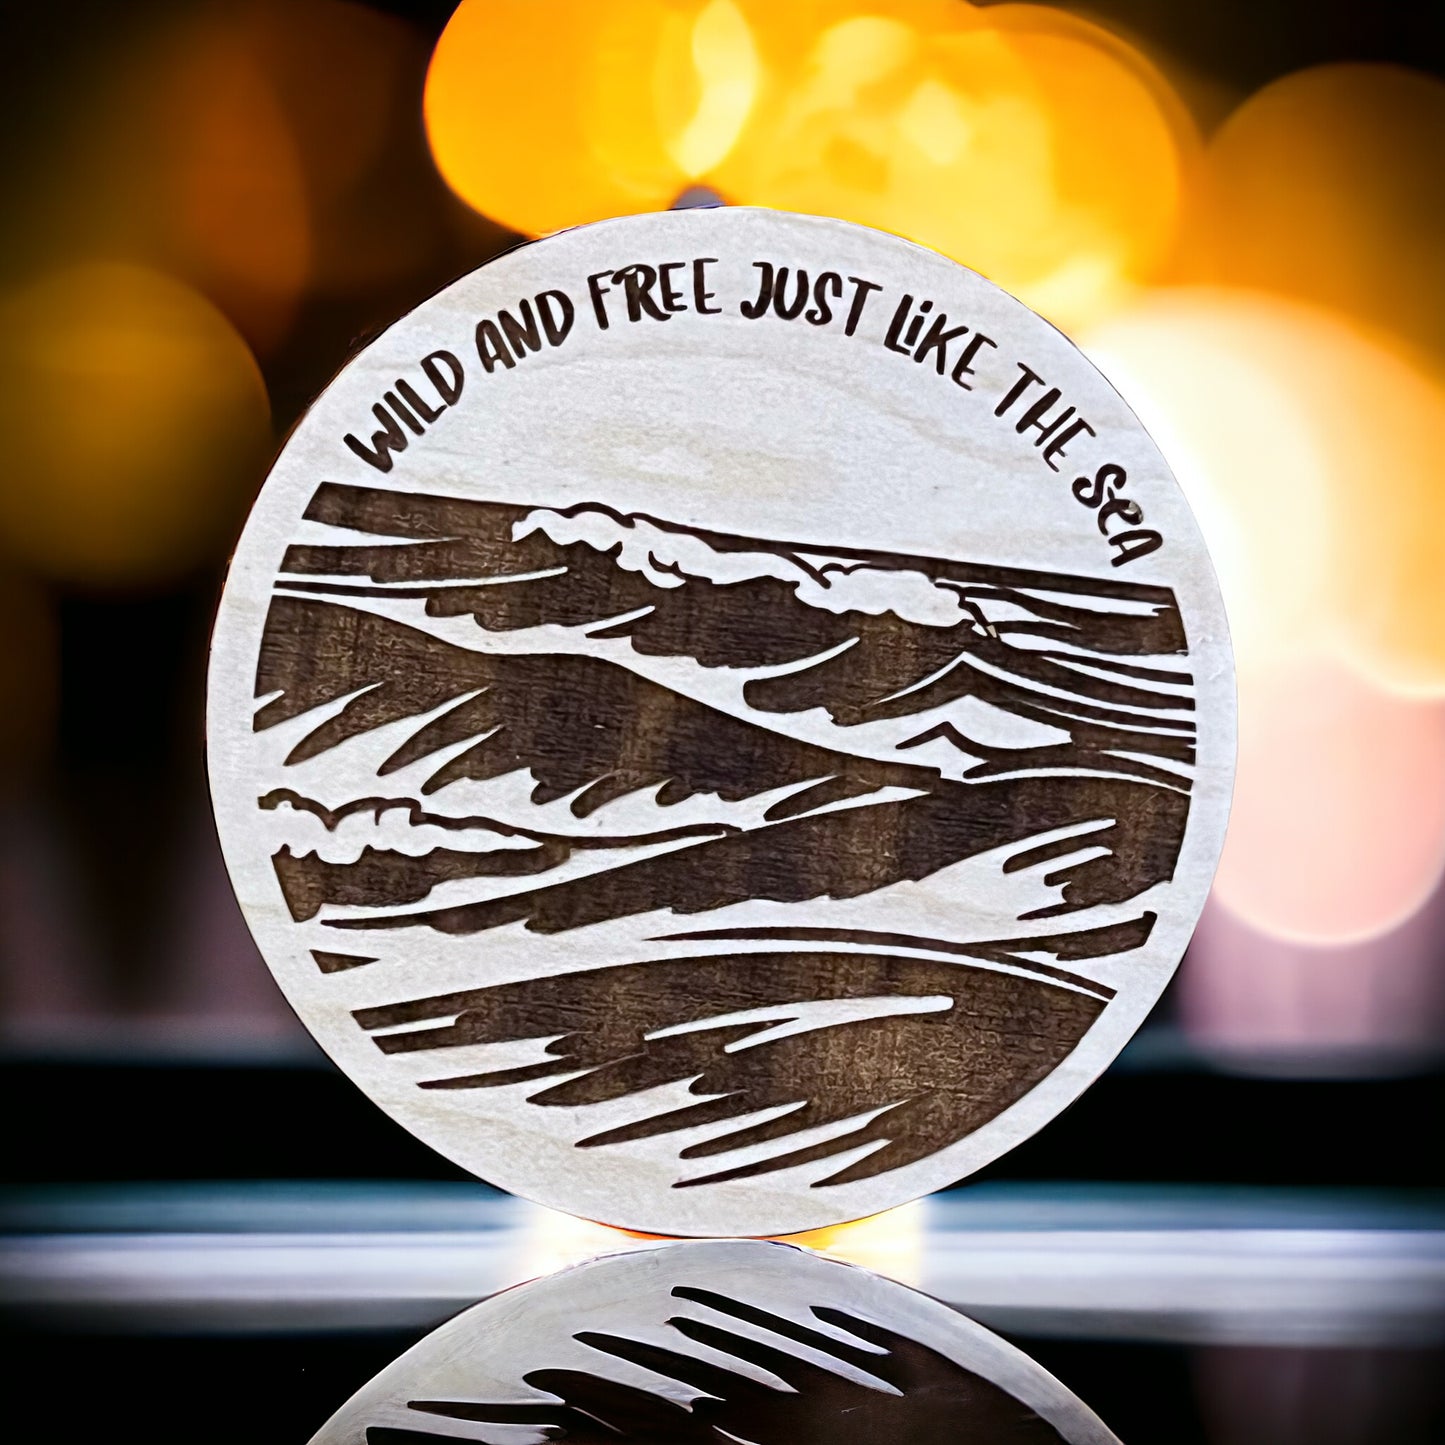 Ocean Waves Scene Wooden Magnet: Engraved with 'Wild & Free Just Like the Sea’